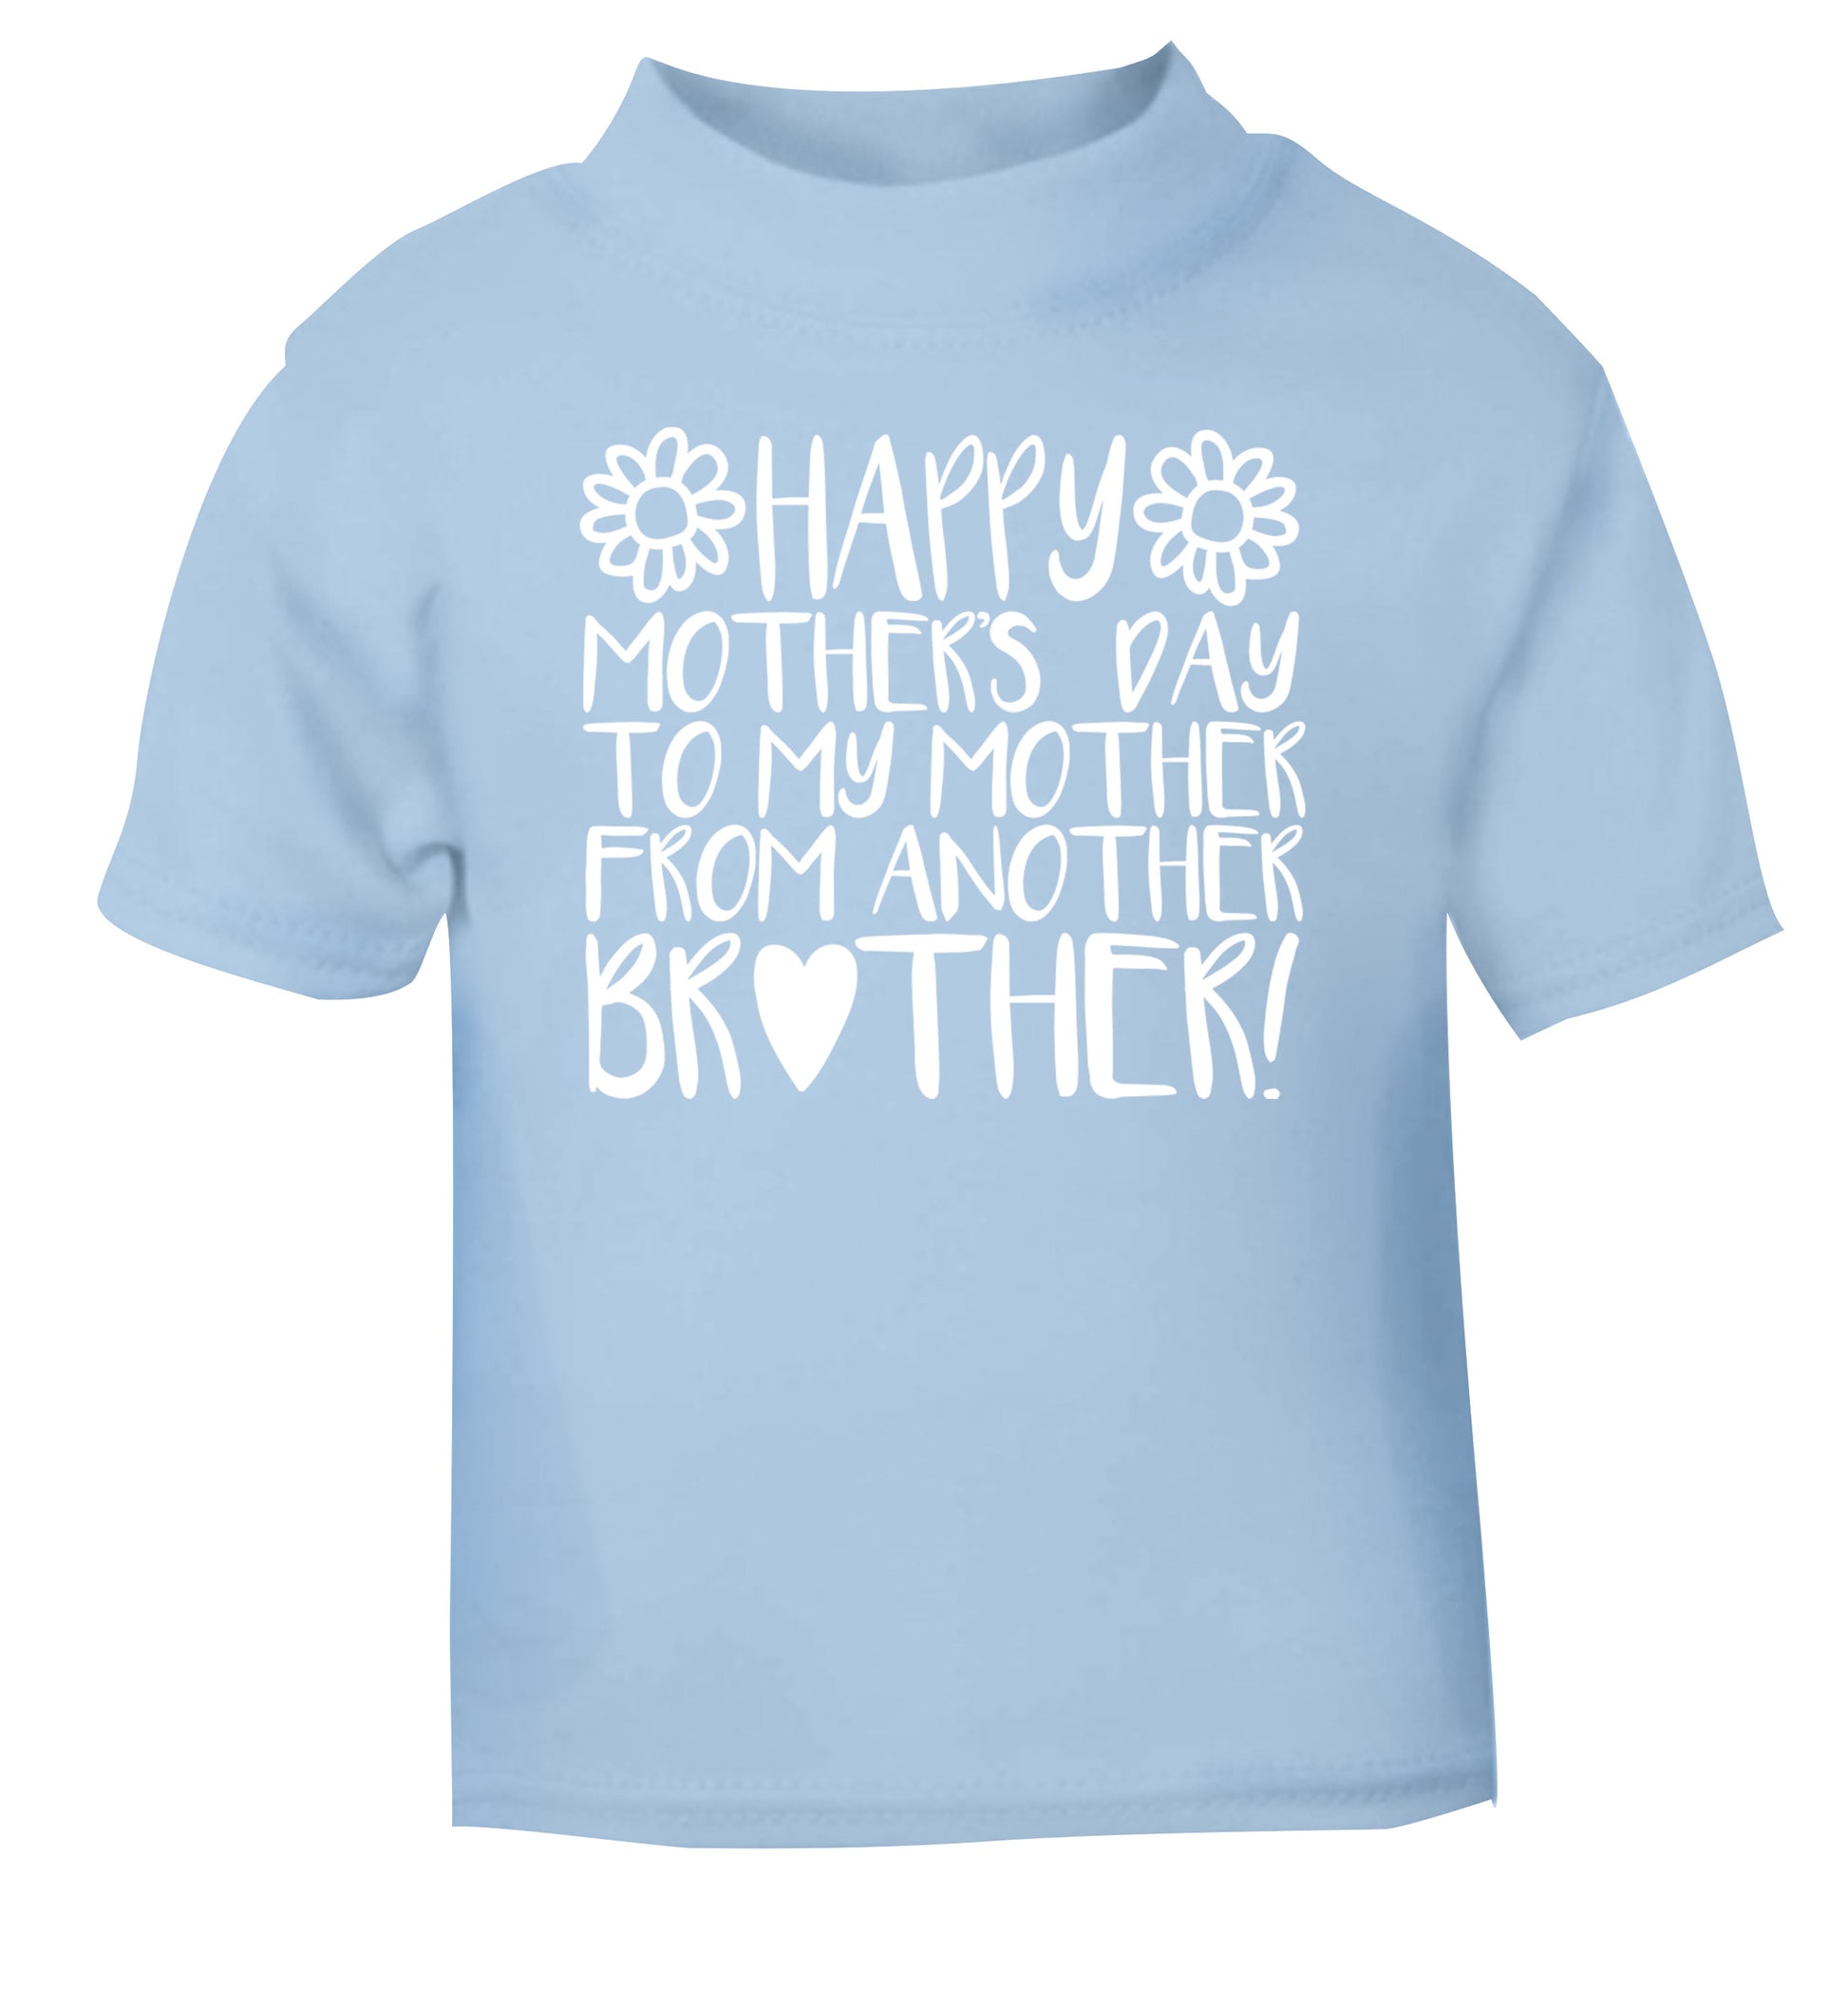 Happy mother's day to my mother from another brother light blue Baby Toddler Tshirt 2 Years